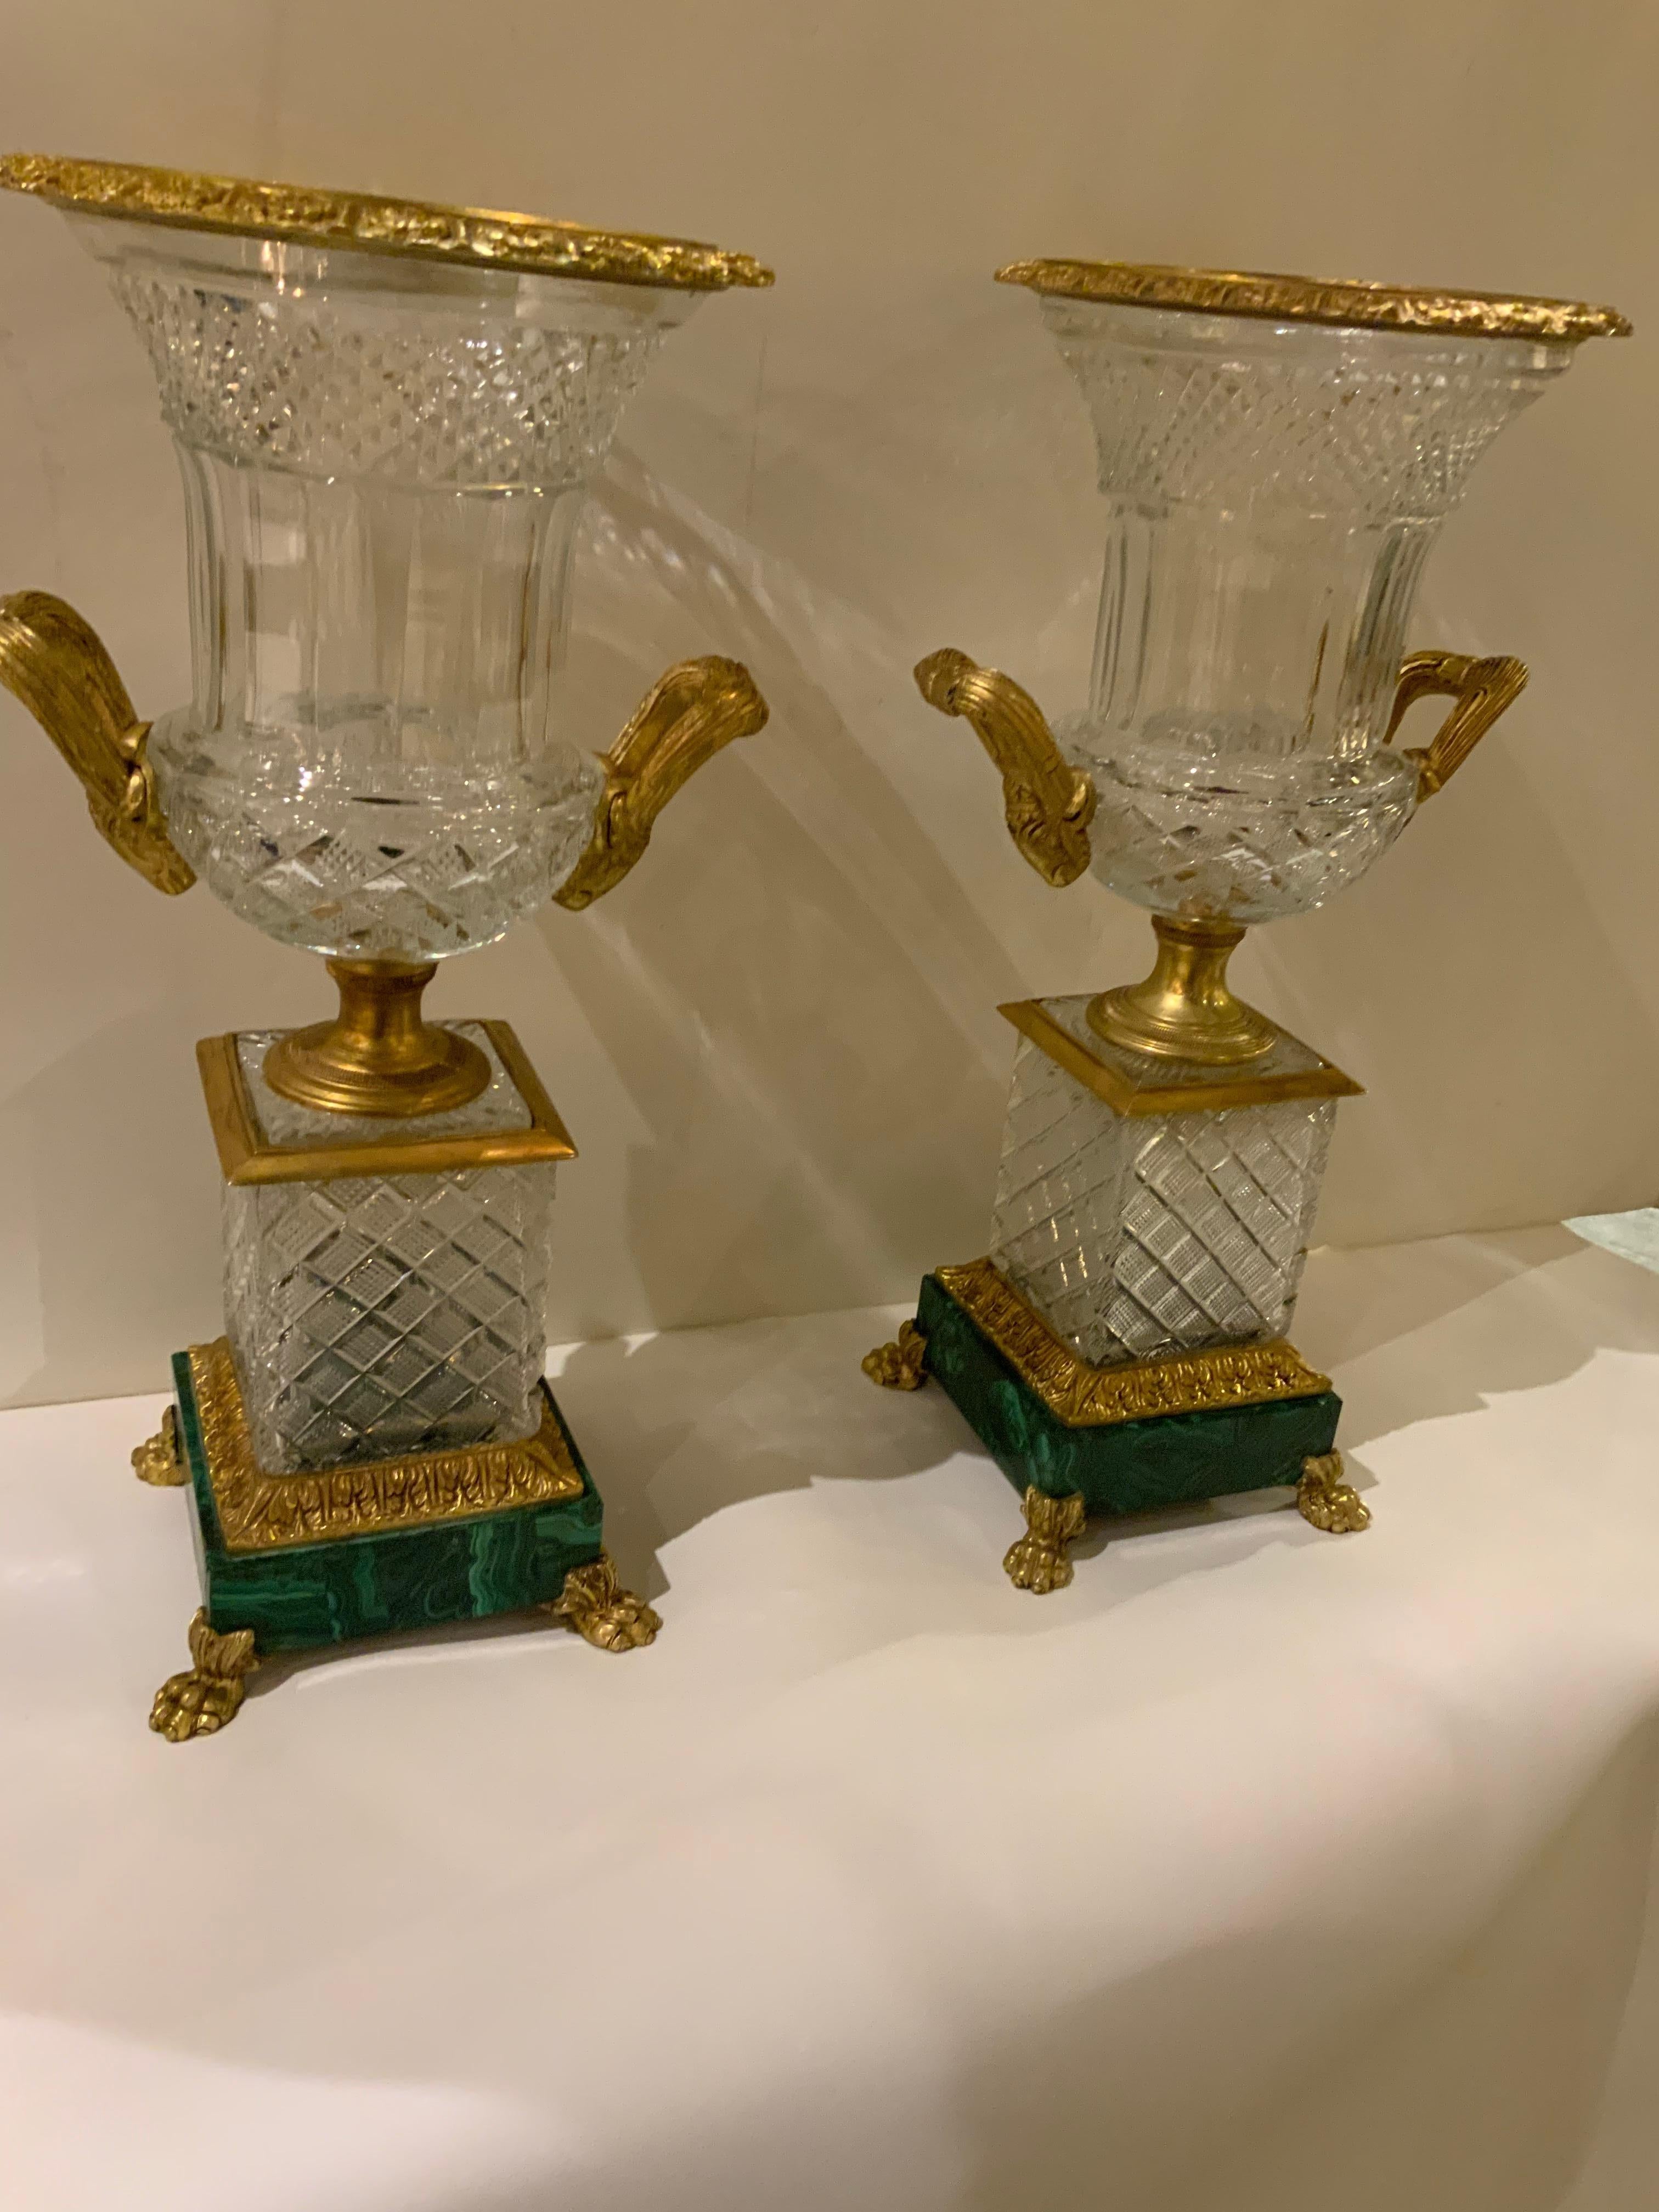 Handsome pair of Baccarat style French urns of cut crystal
With gilt bronze mounts. These urns are mounted on
Dark green malachite bases. The gilt bronze is in a light
Golden hue without blemishes. The cut crystal is very finely
Accomplished